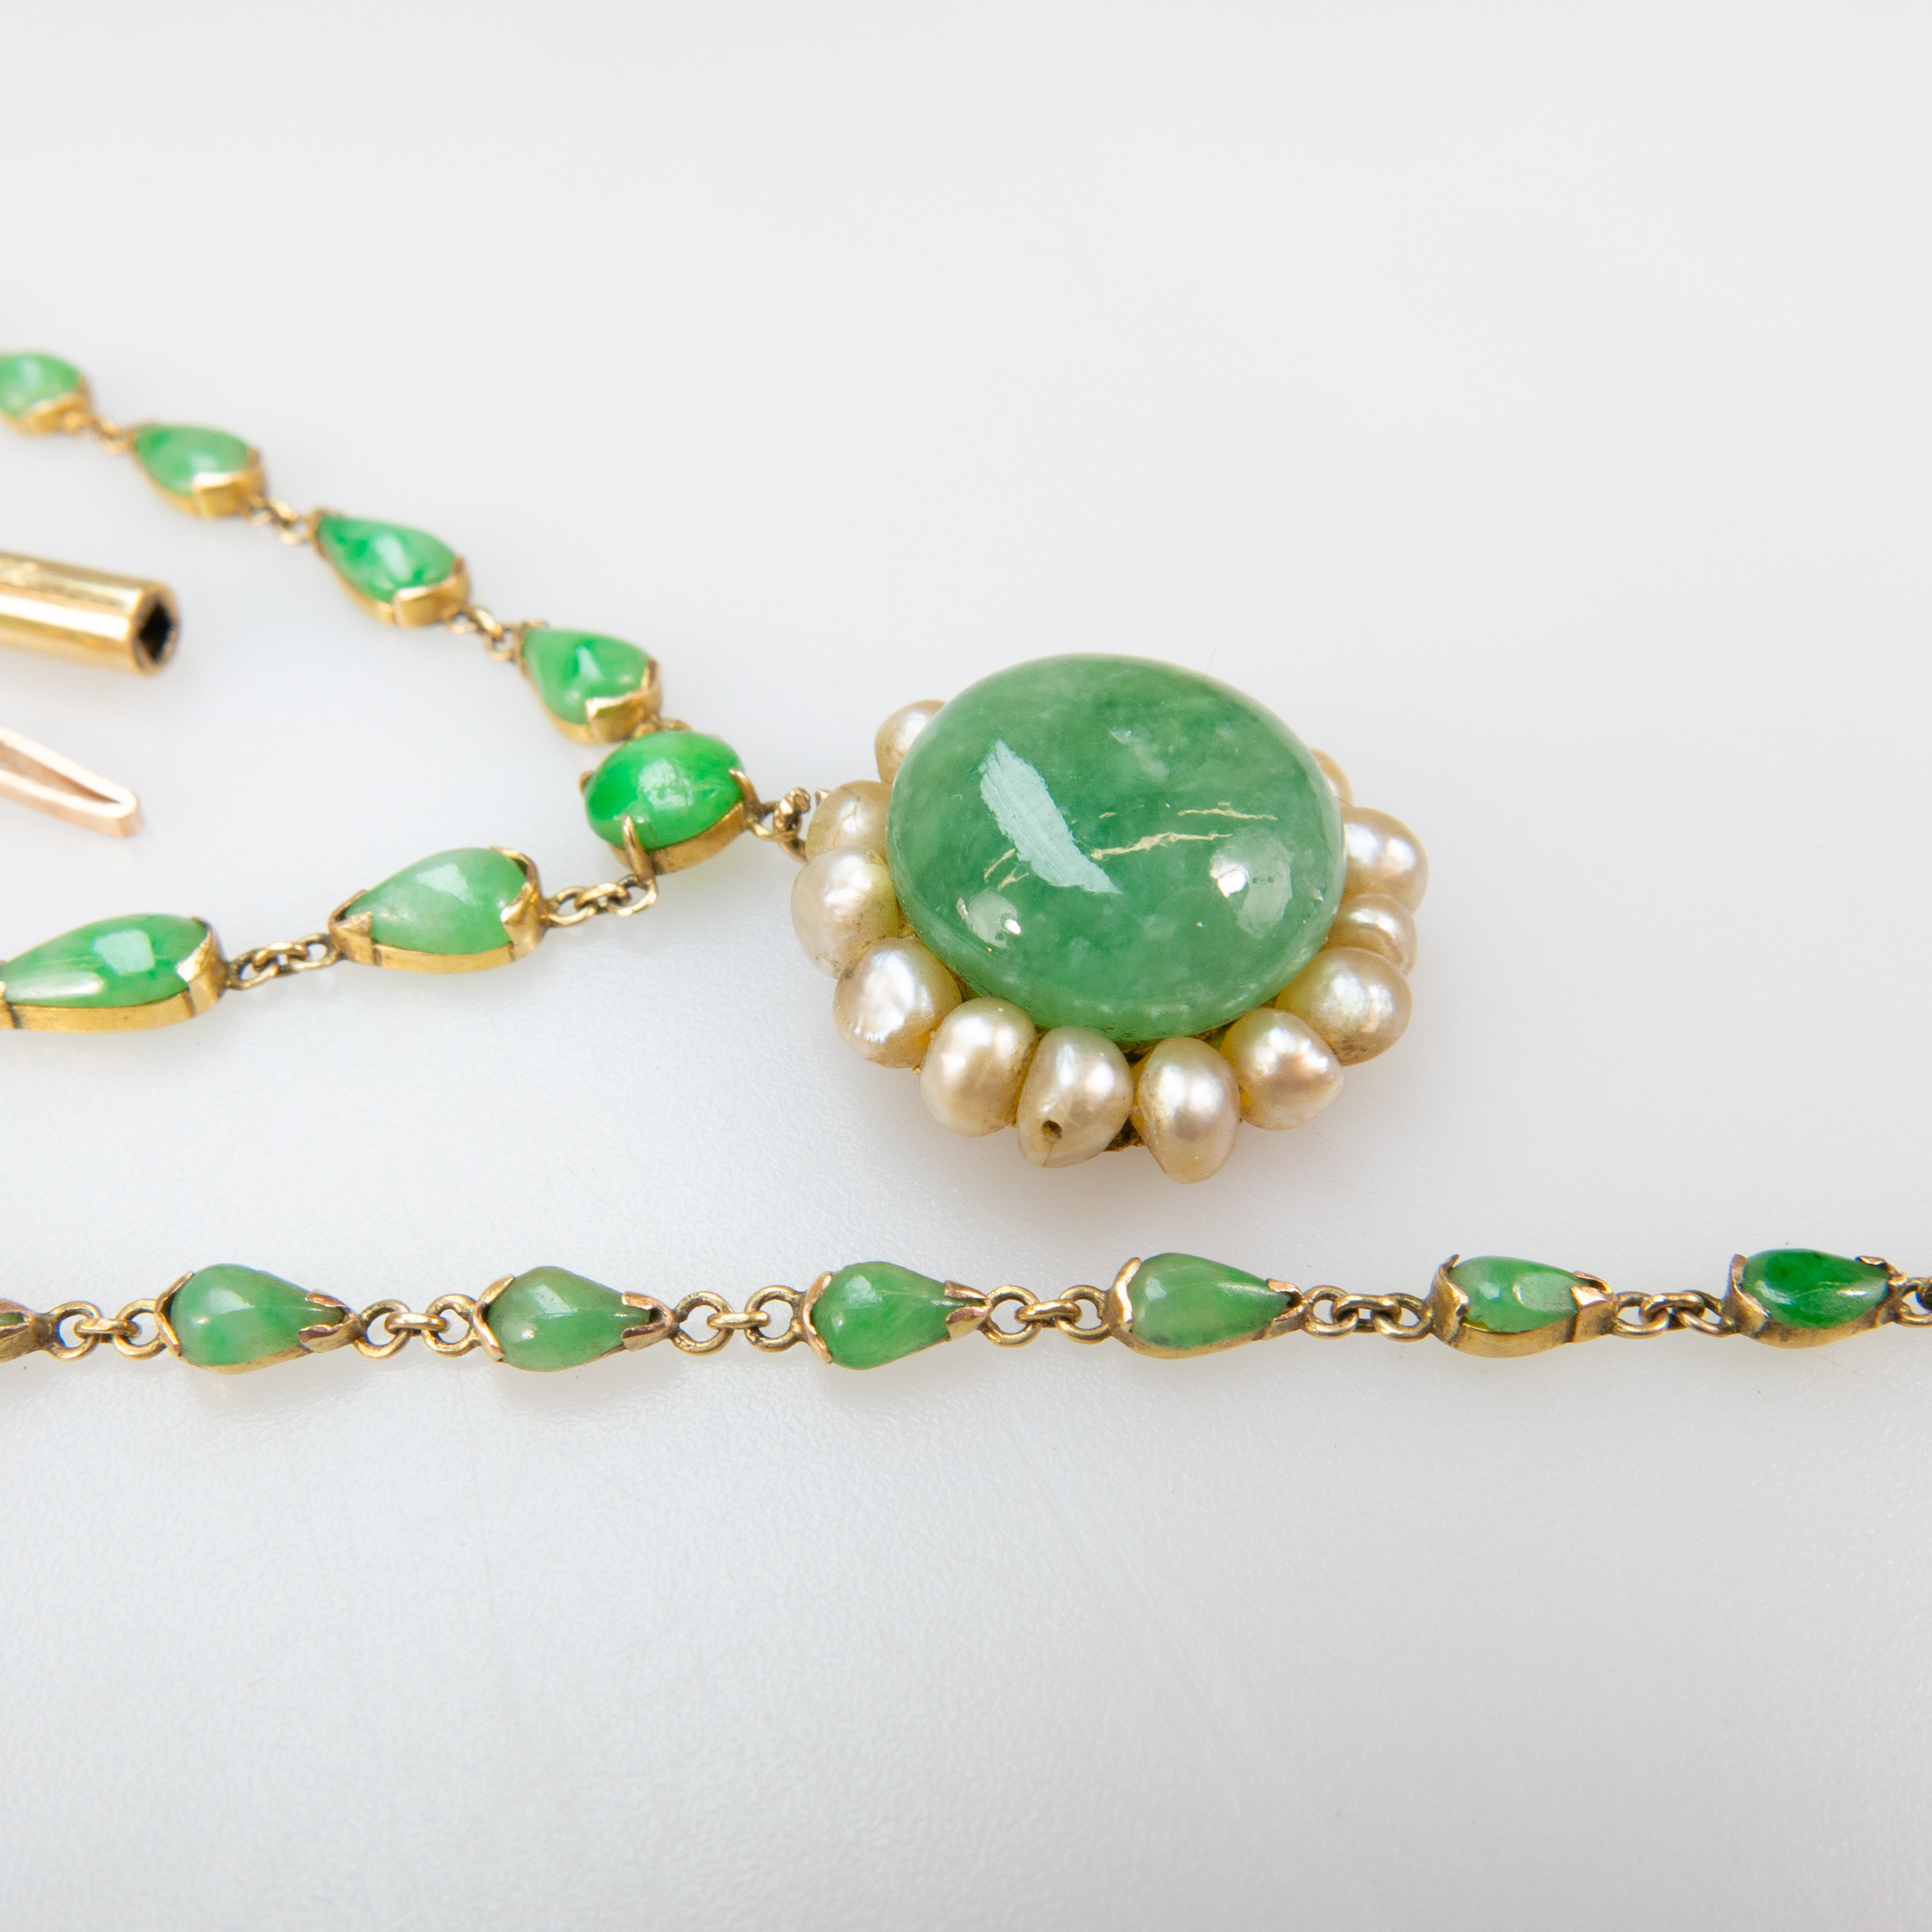 Gold And Jadeite Necklace And Bracelet